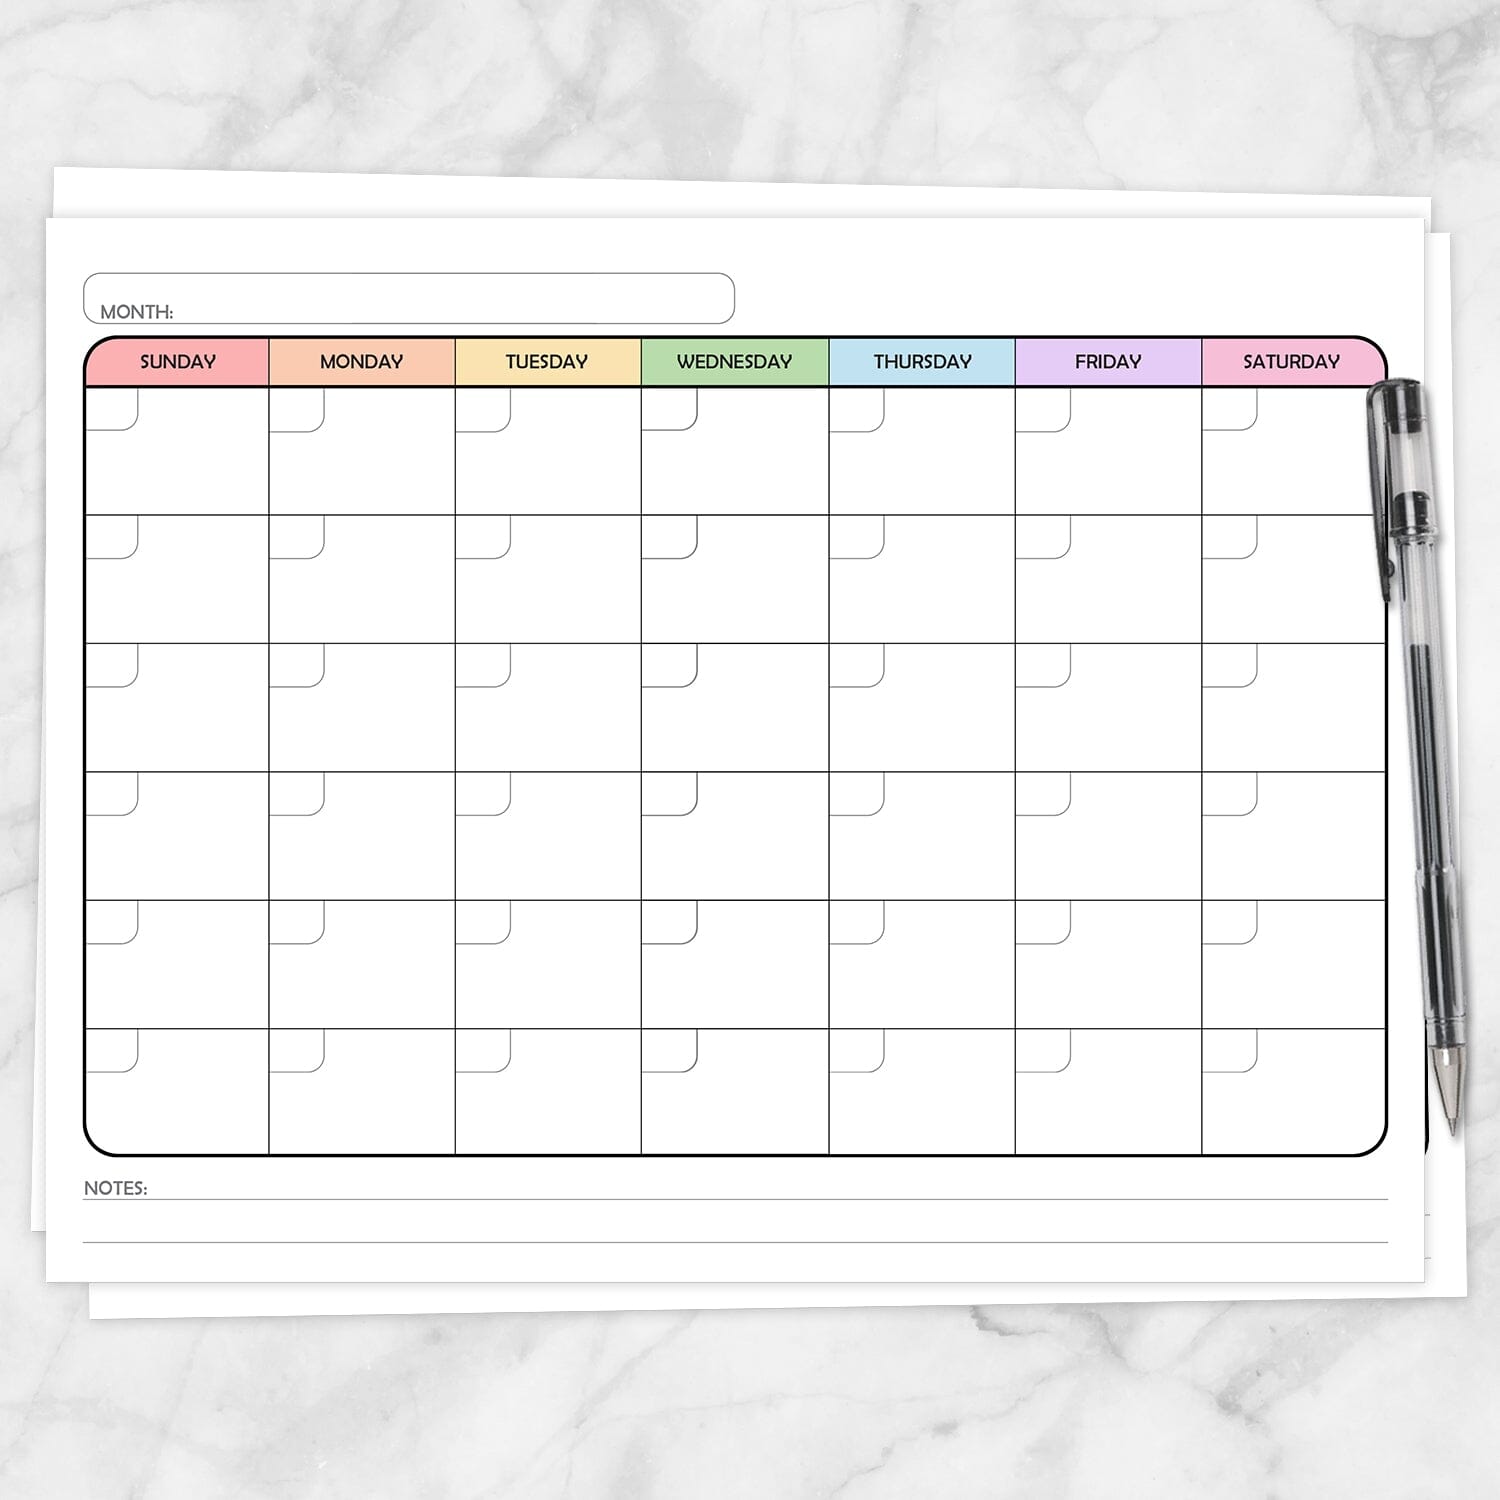 Printable Modern Blank Monthly Calendar - Rainbow Full Page at Printable Planning.